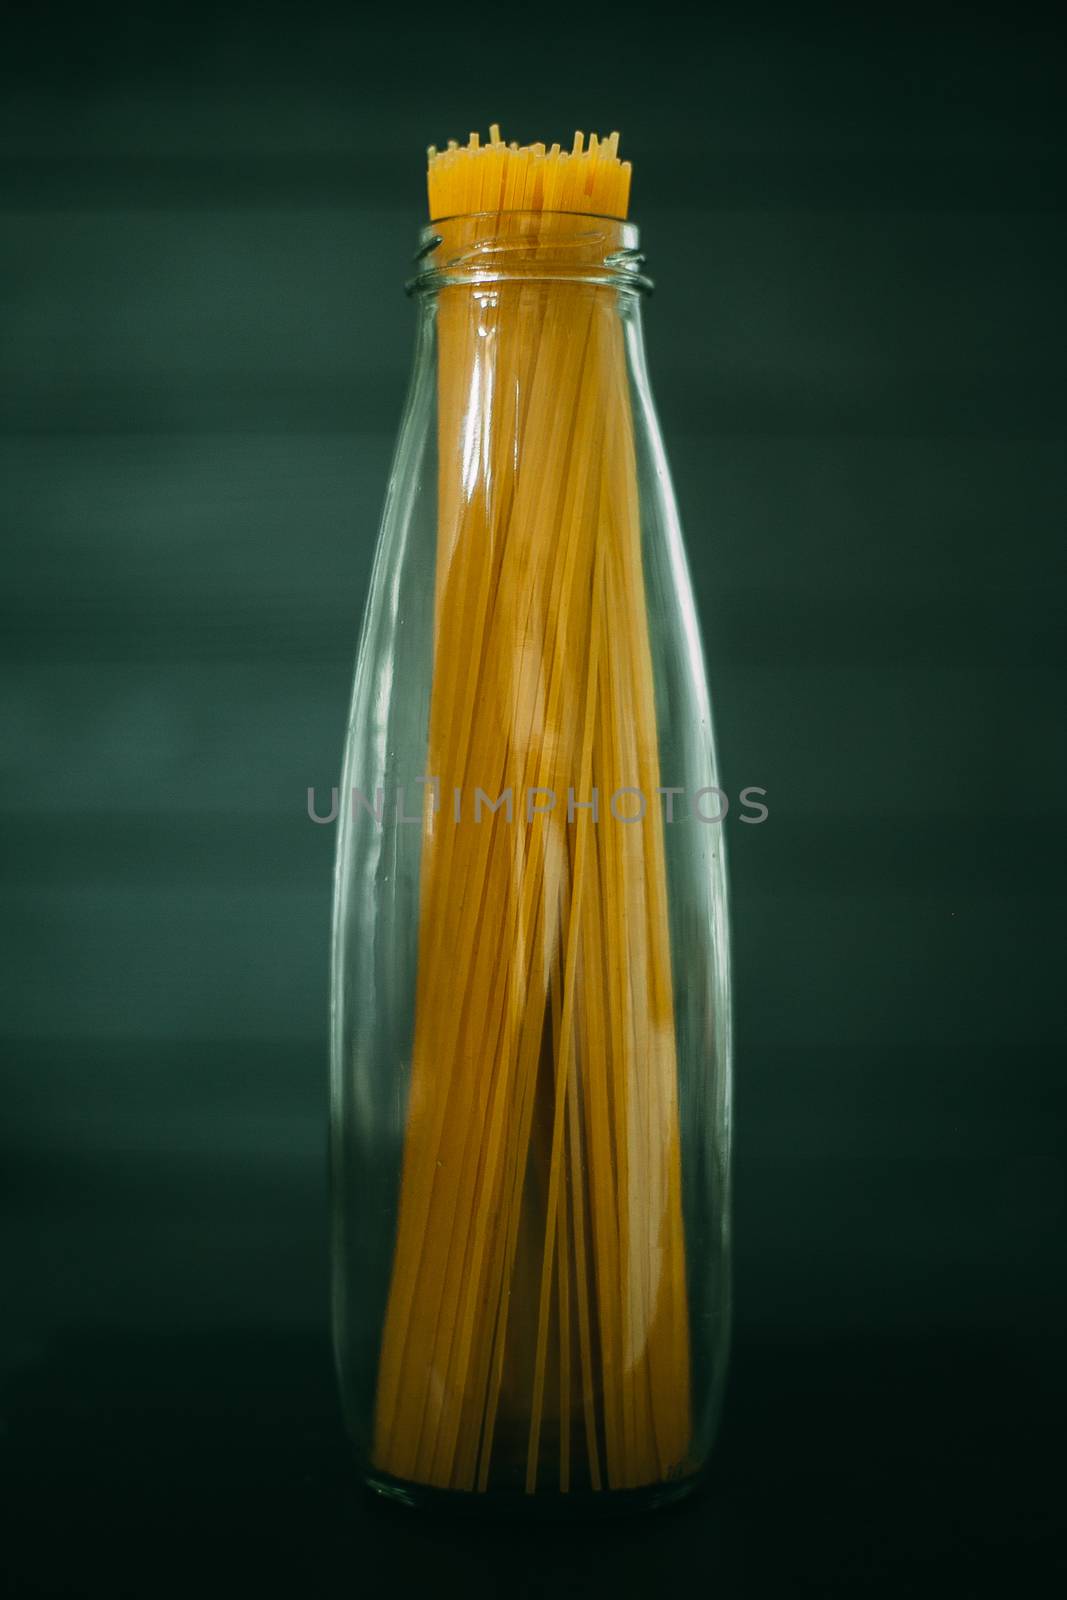 Spaghetti in a glass jar on a white tile background by Opikanets